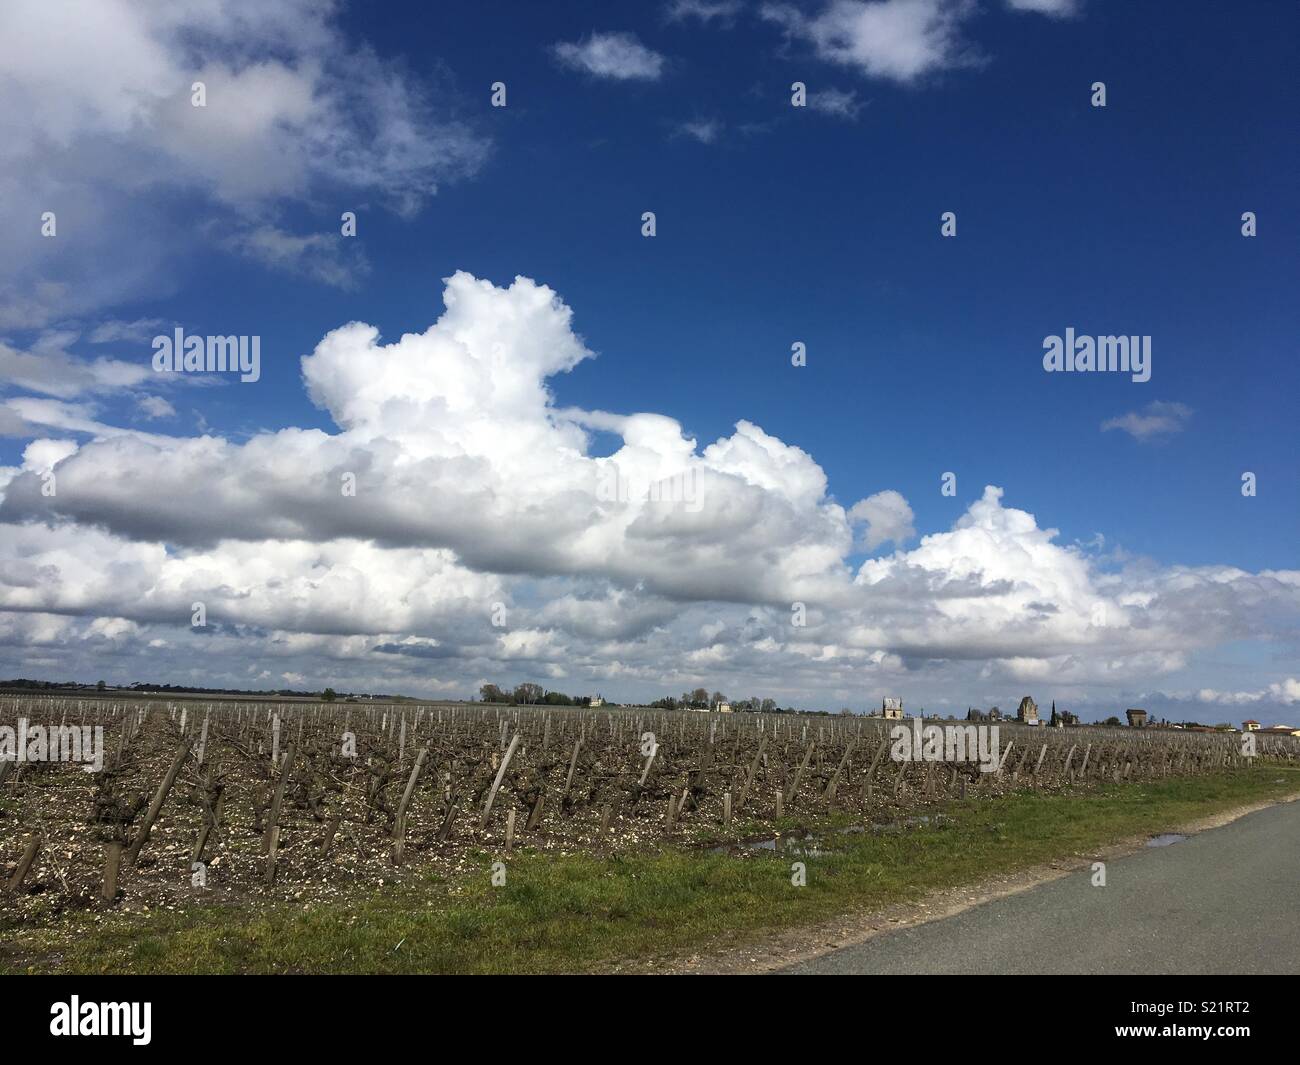 Bordeaux red wine, vin yards and clouds Stock Photo